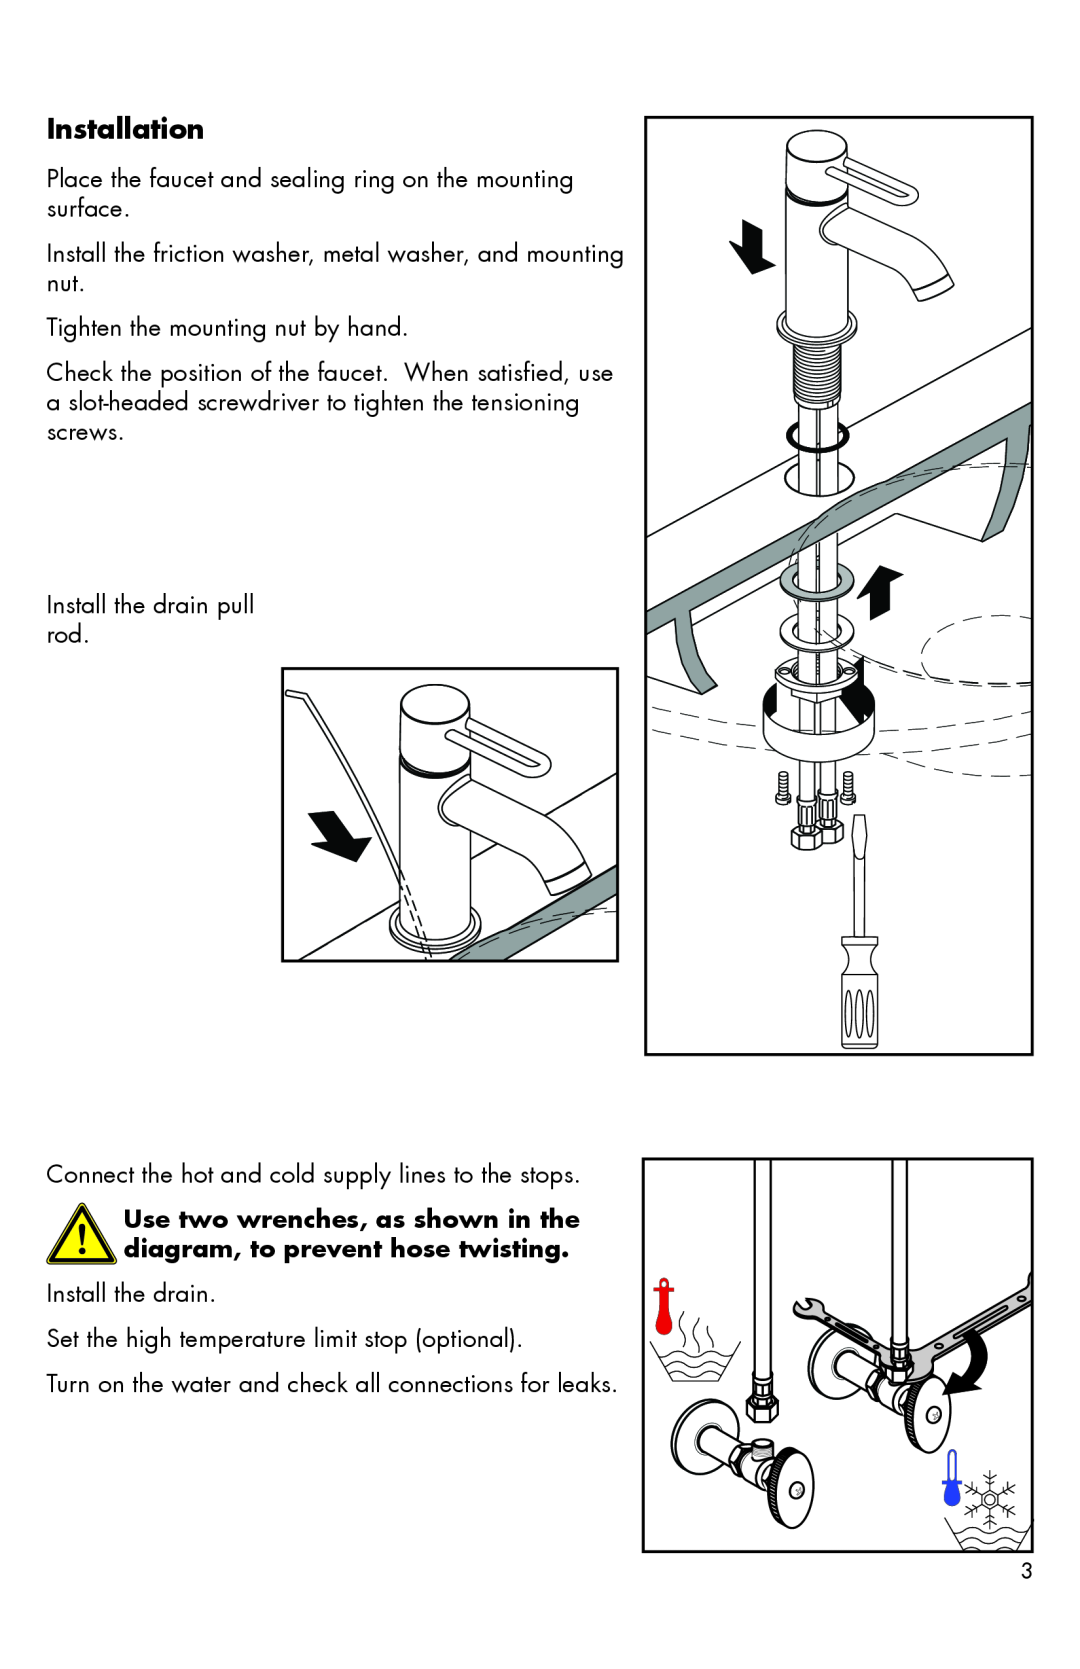 Axor 3802XX1, 38210XX1, 38025XX1 Installation, Use two wrenches, as shown in the diagram, to prevent hose twisting 